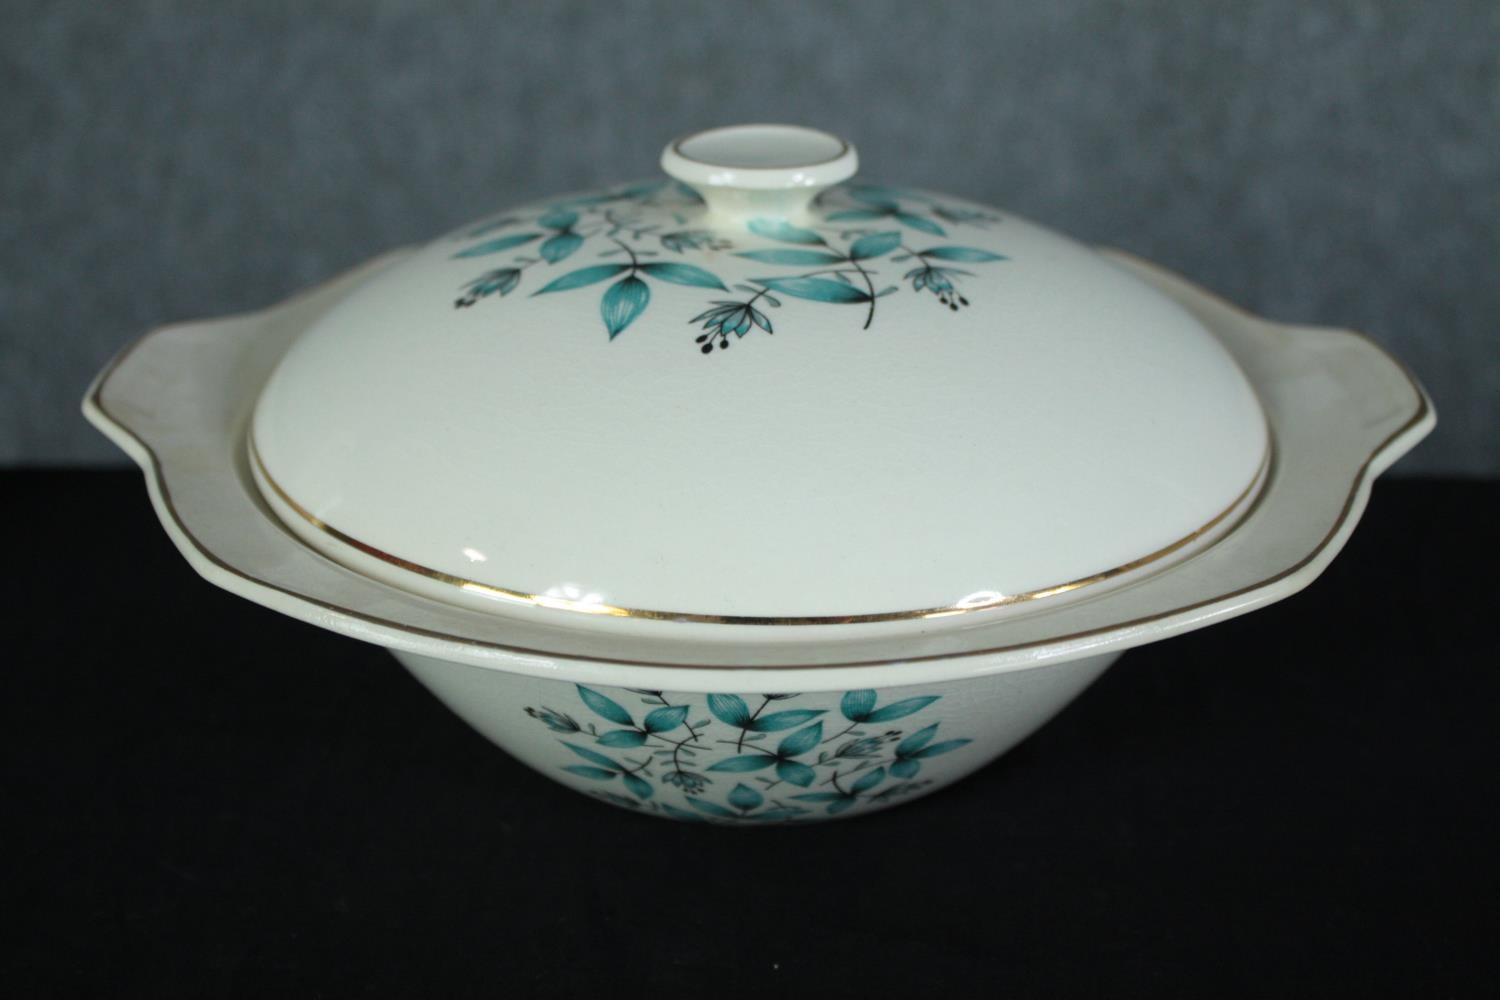 Vogue Tableware by by H. Aynsley with floral decorations. Dia.27cm. (largest) - Image 5 of 8